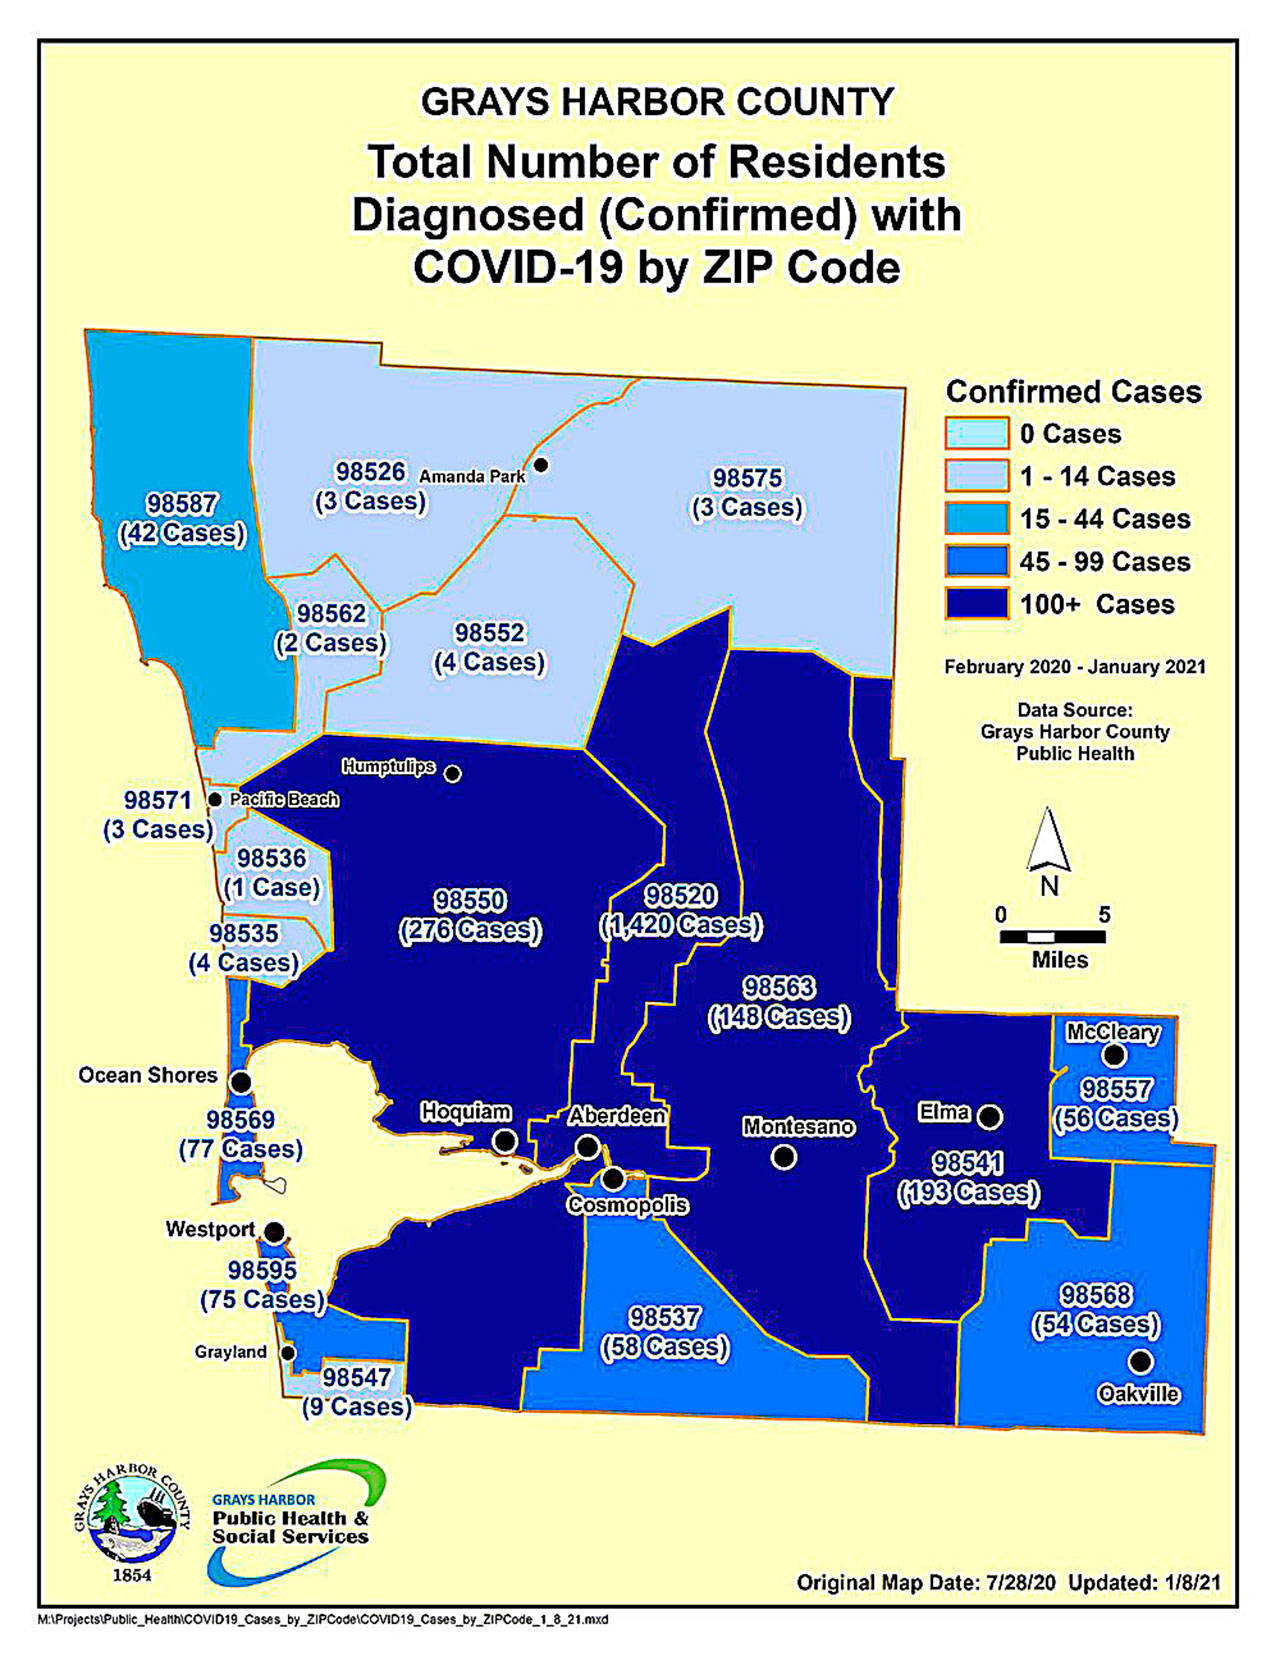 COURTESY GRAYS HARBOR PUBLIC HEALTH 
COVID cases by zip code in Grays Harbor County, updated Jan. 8.